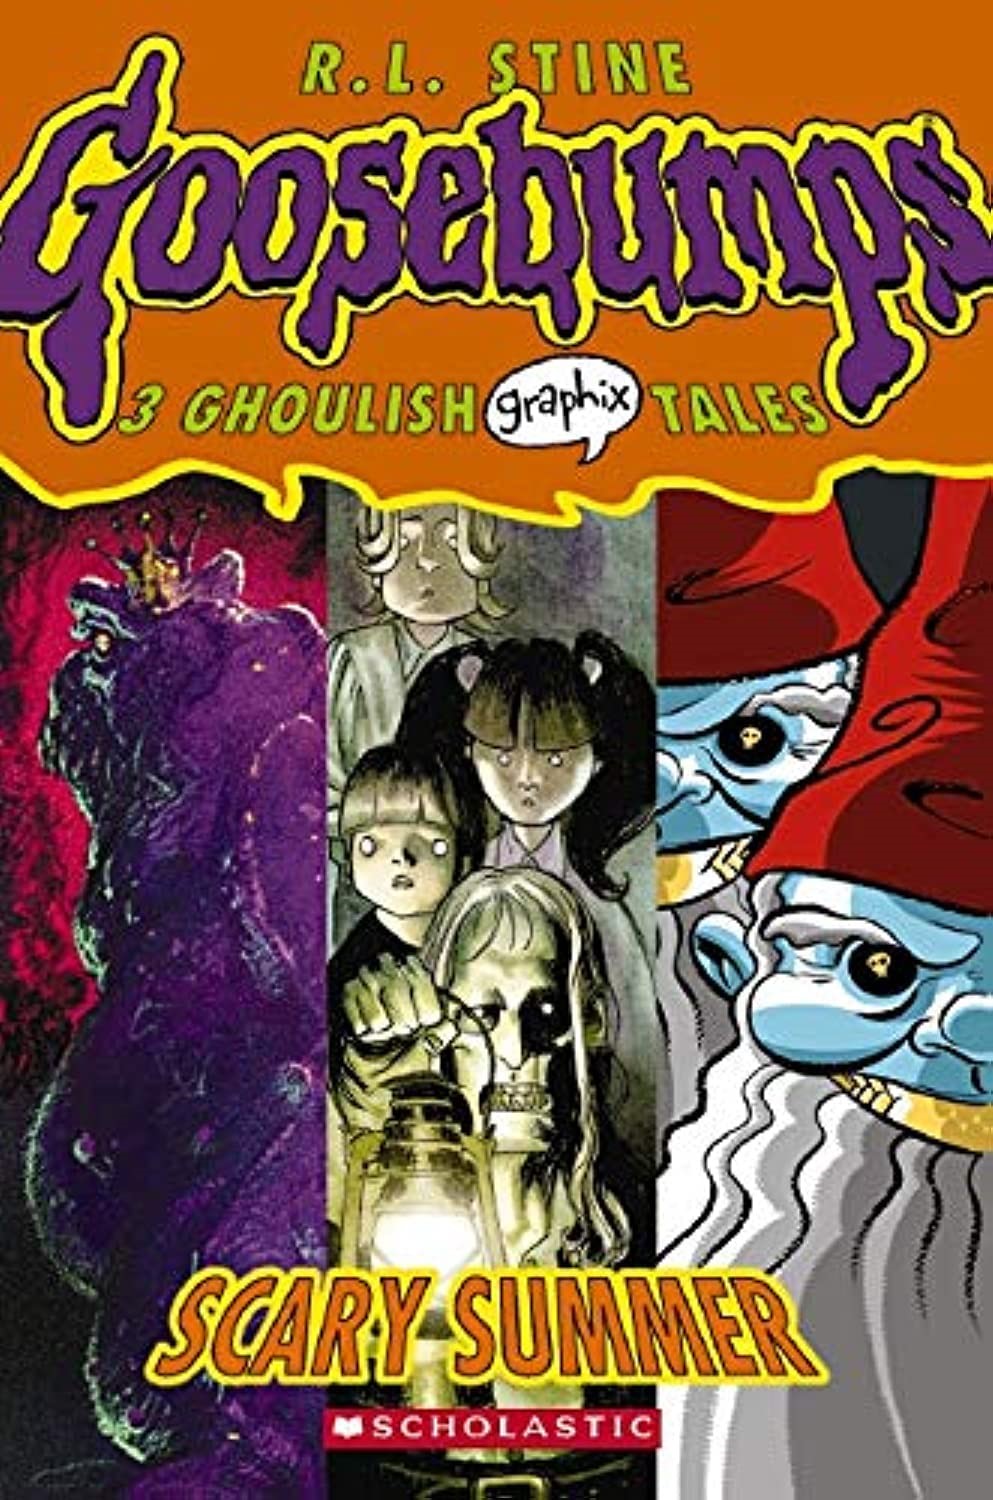 Goosebumps 3 Ghoulish Graphix Tales Volume 3: Scary Summer